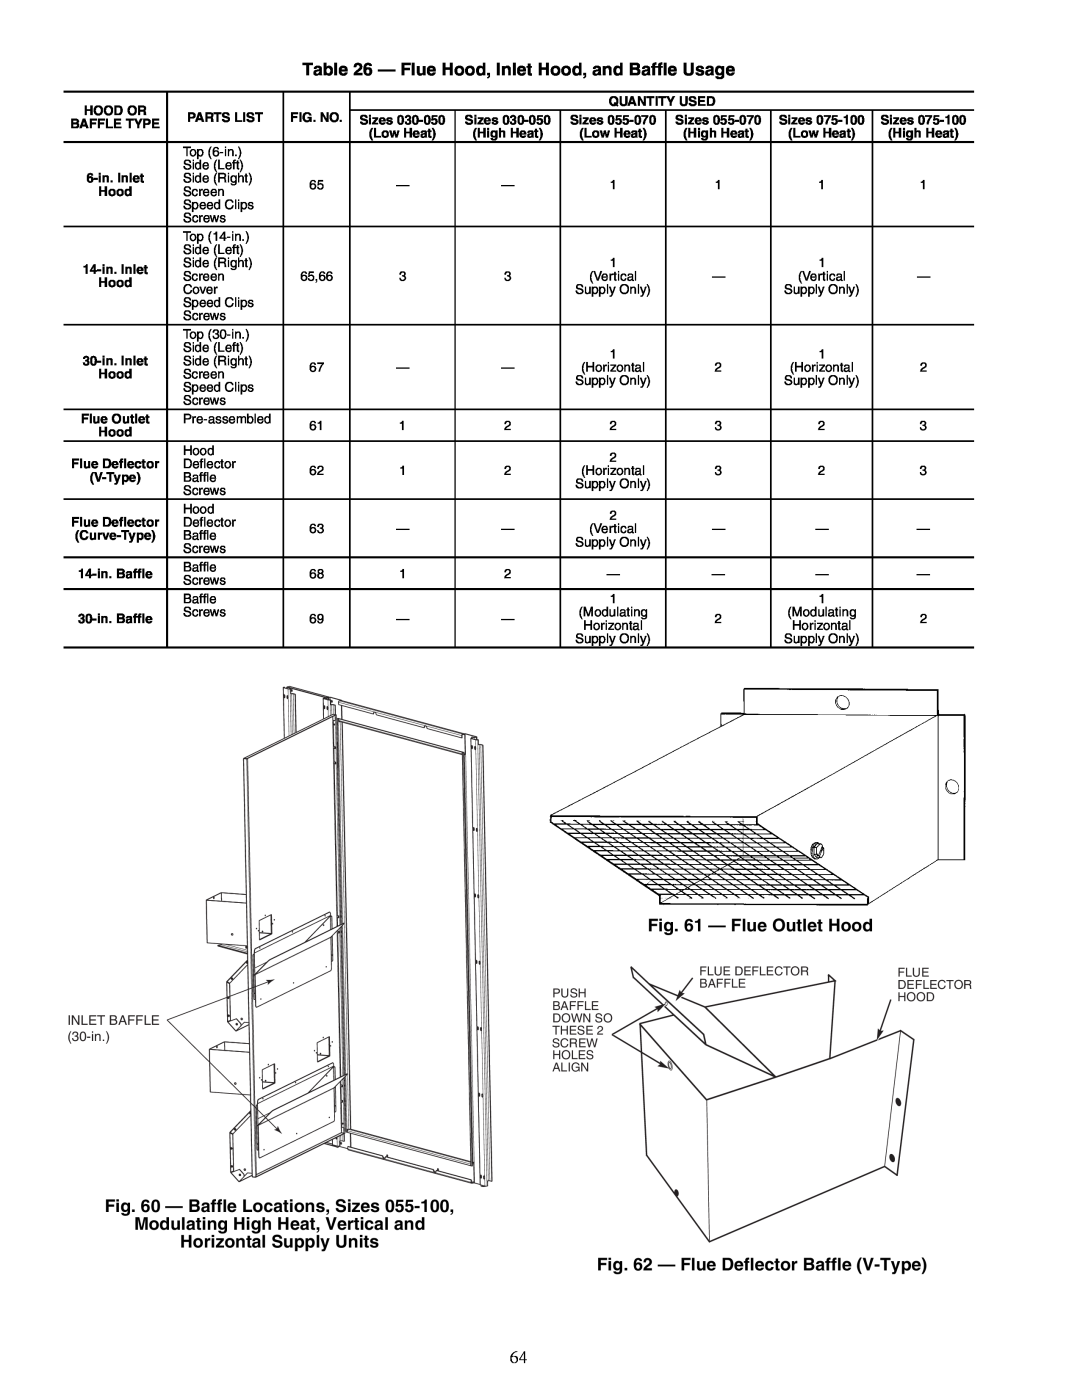 Carrier P5030-100, P3, 48P2, P4 Flue Outlet Hood, Baffle Locations, Sizes, a48-8587, Horizontal Supply Units, a48-8586 